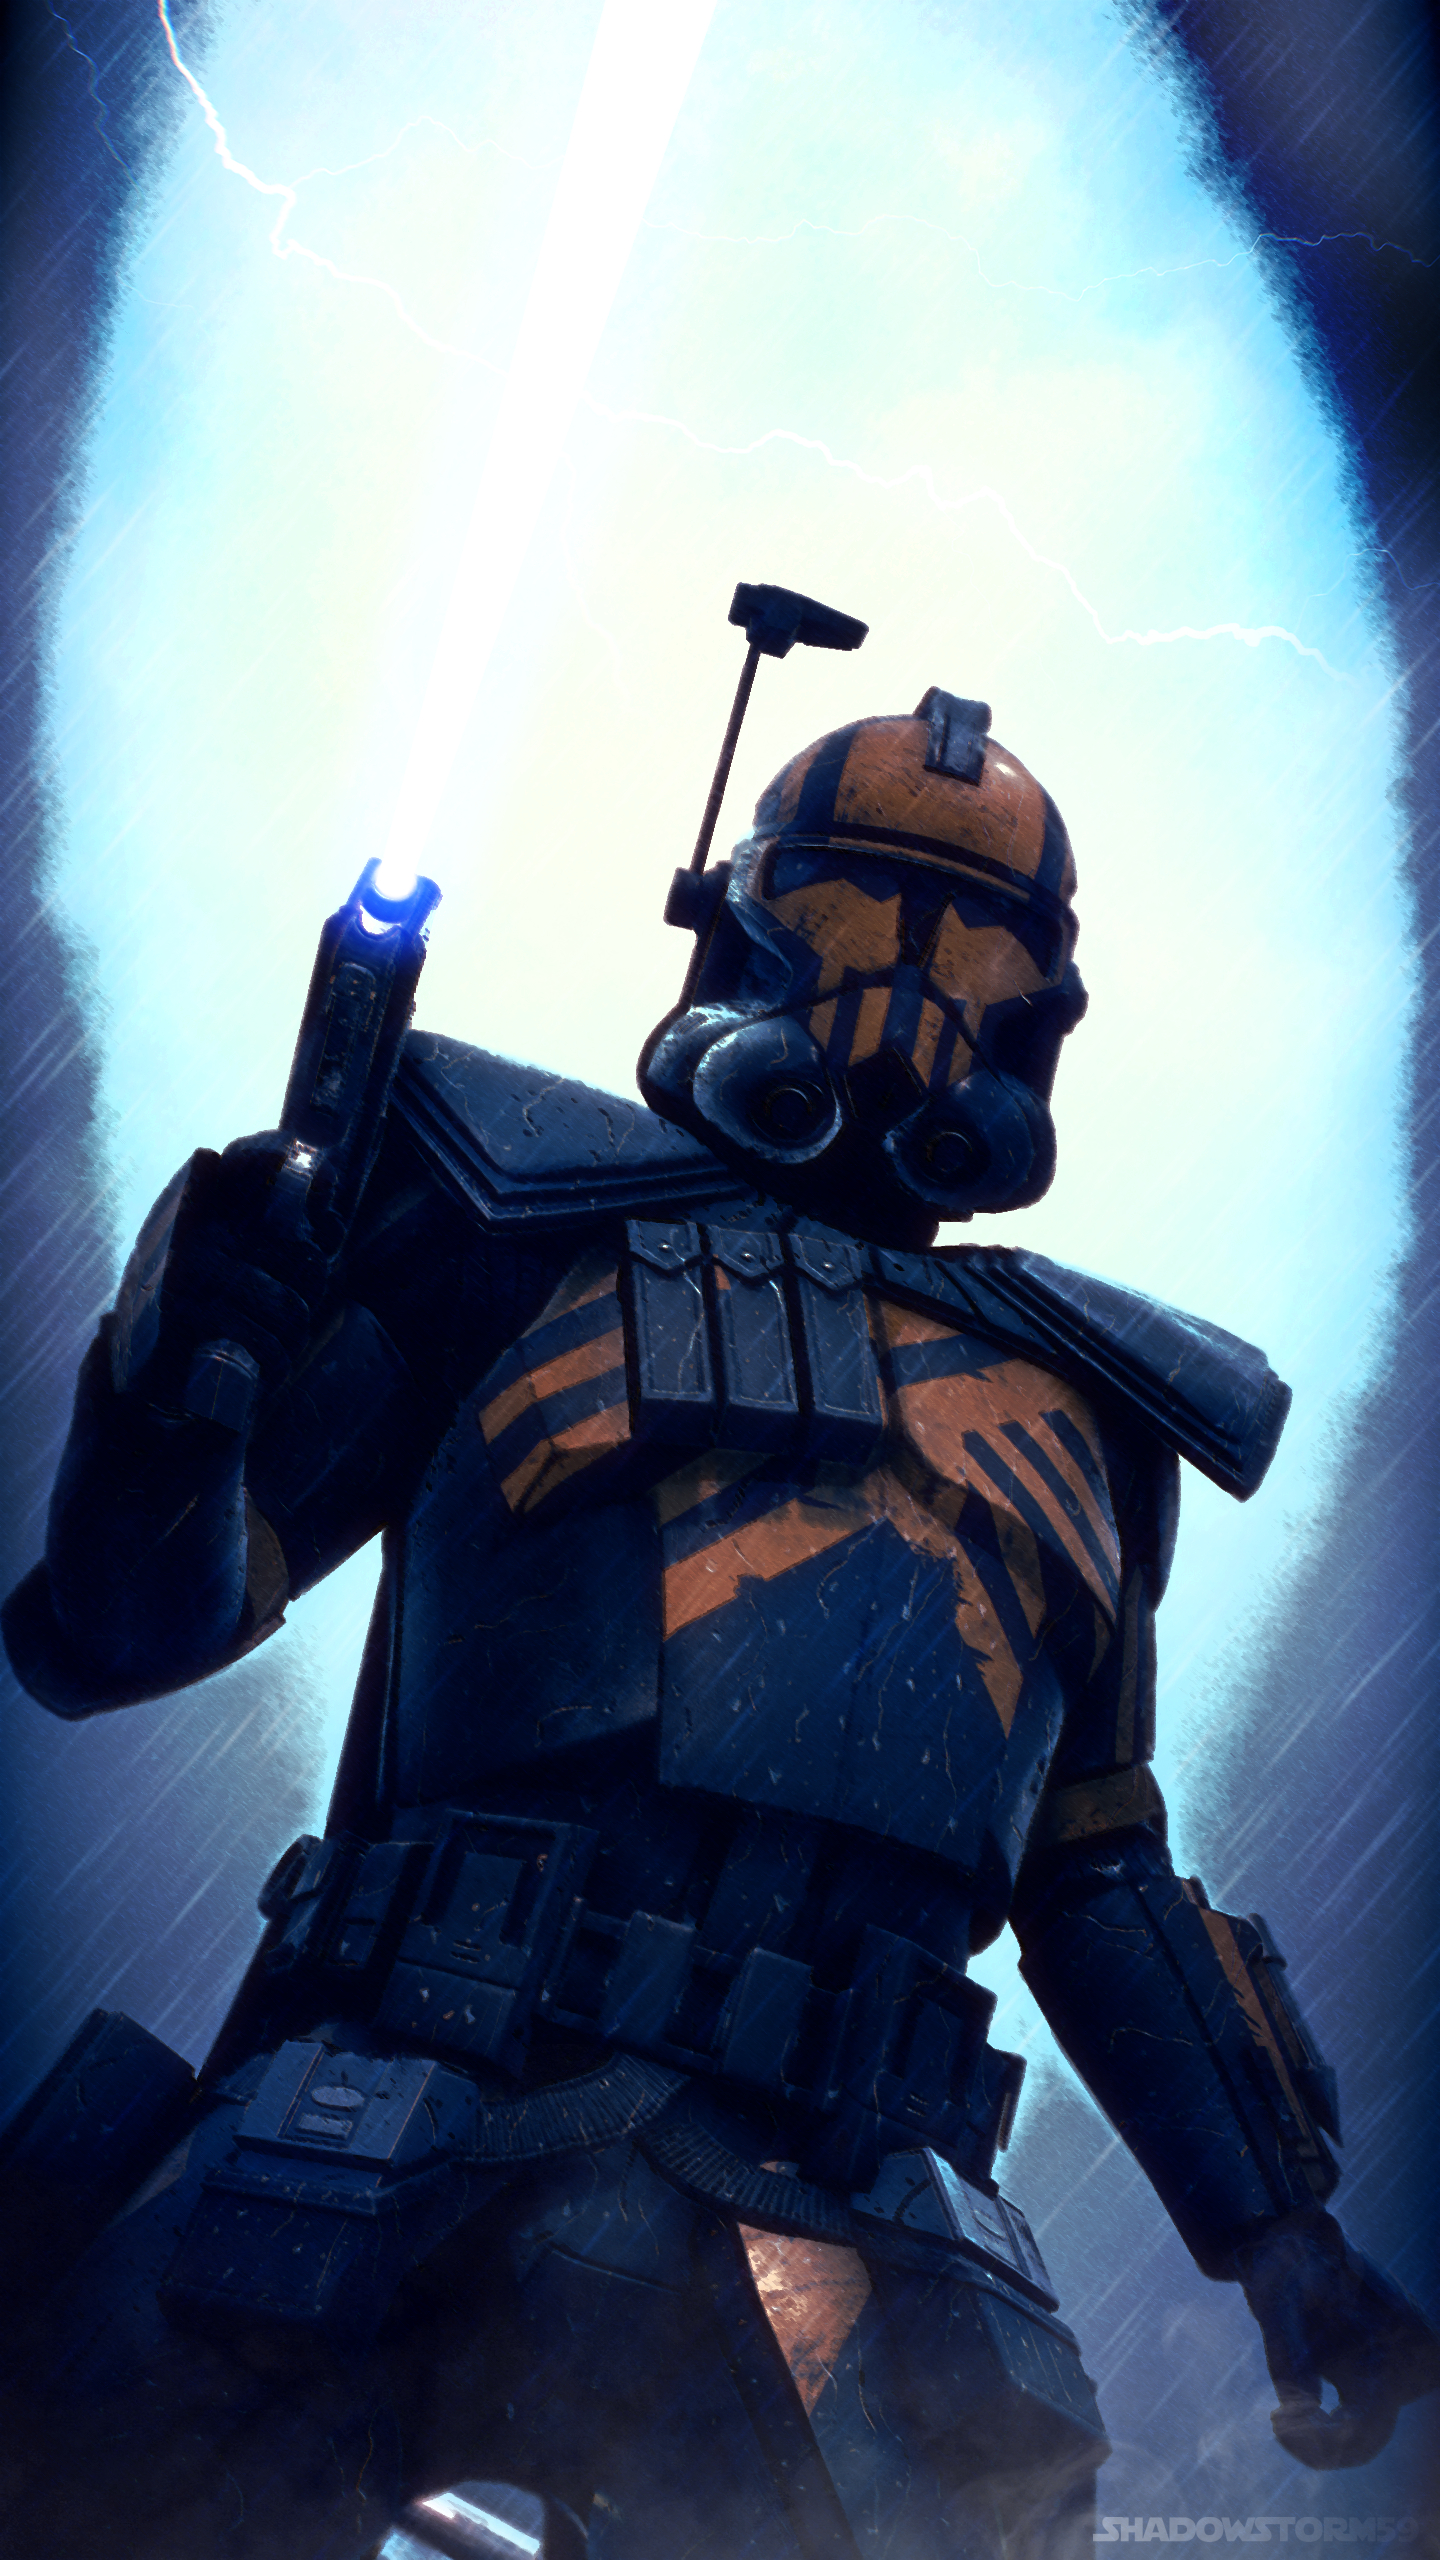 1440x2560 Star Wars Umbra Operative Clone Wallpaper | Star wars trooper, Star wars characters pictures, Star wars images